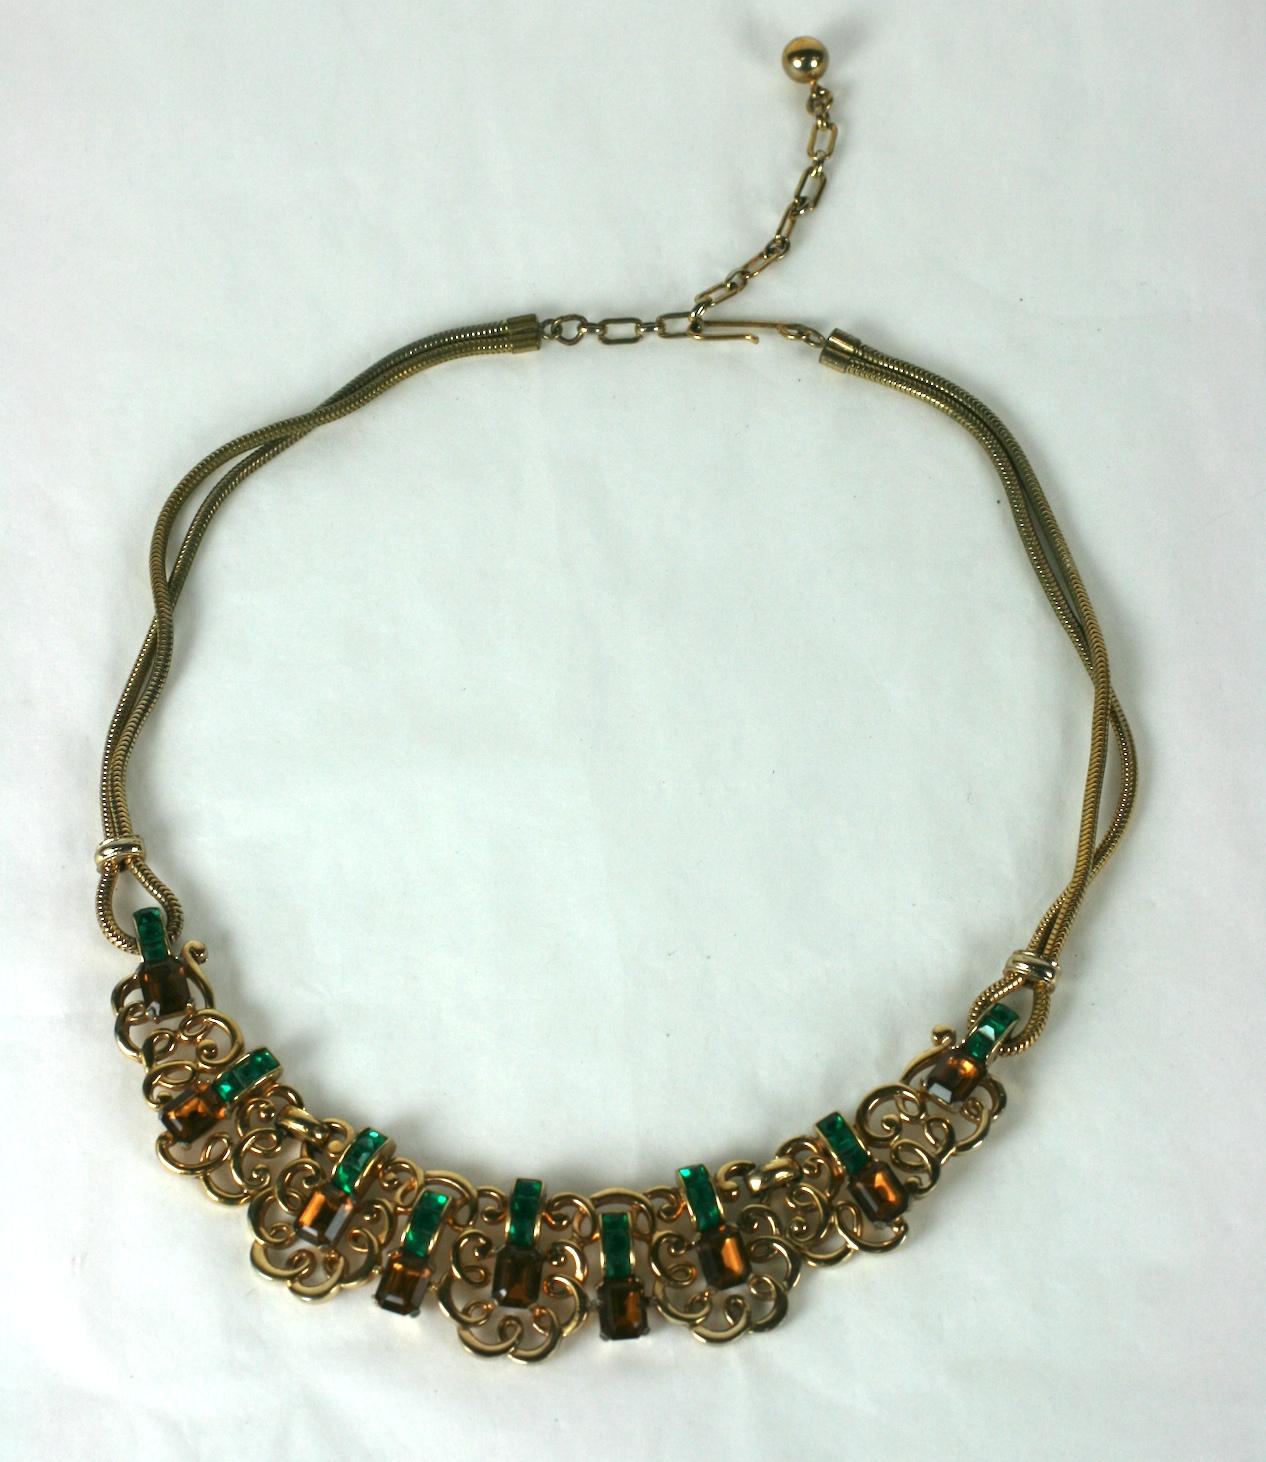 Marcel Boucher Retro Necklace with a centerpiece of scrolled designs with faux emerald and topaz square cut pastes. Center motif is held by a looped snake chain.
1940's USA. Signed 